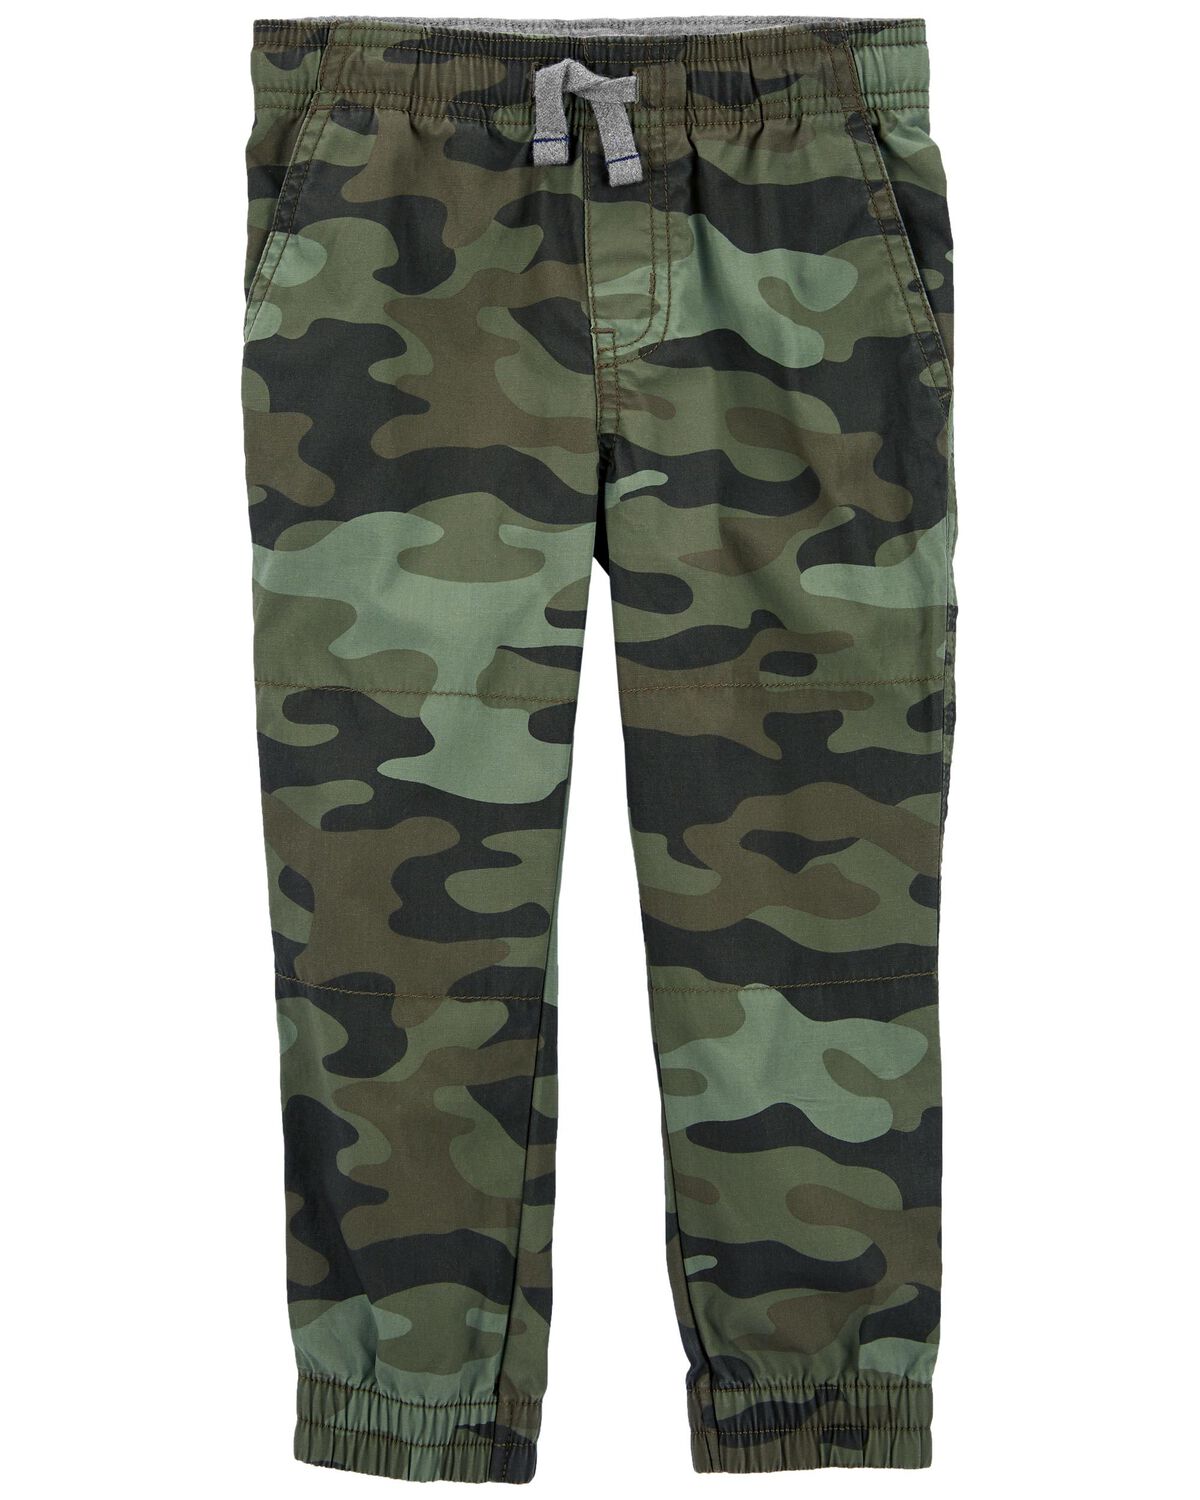 Green Baby Camo Everyday Pull-On Pants | carters.com